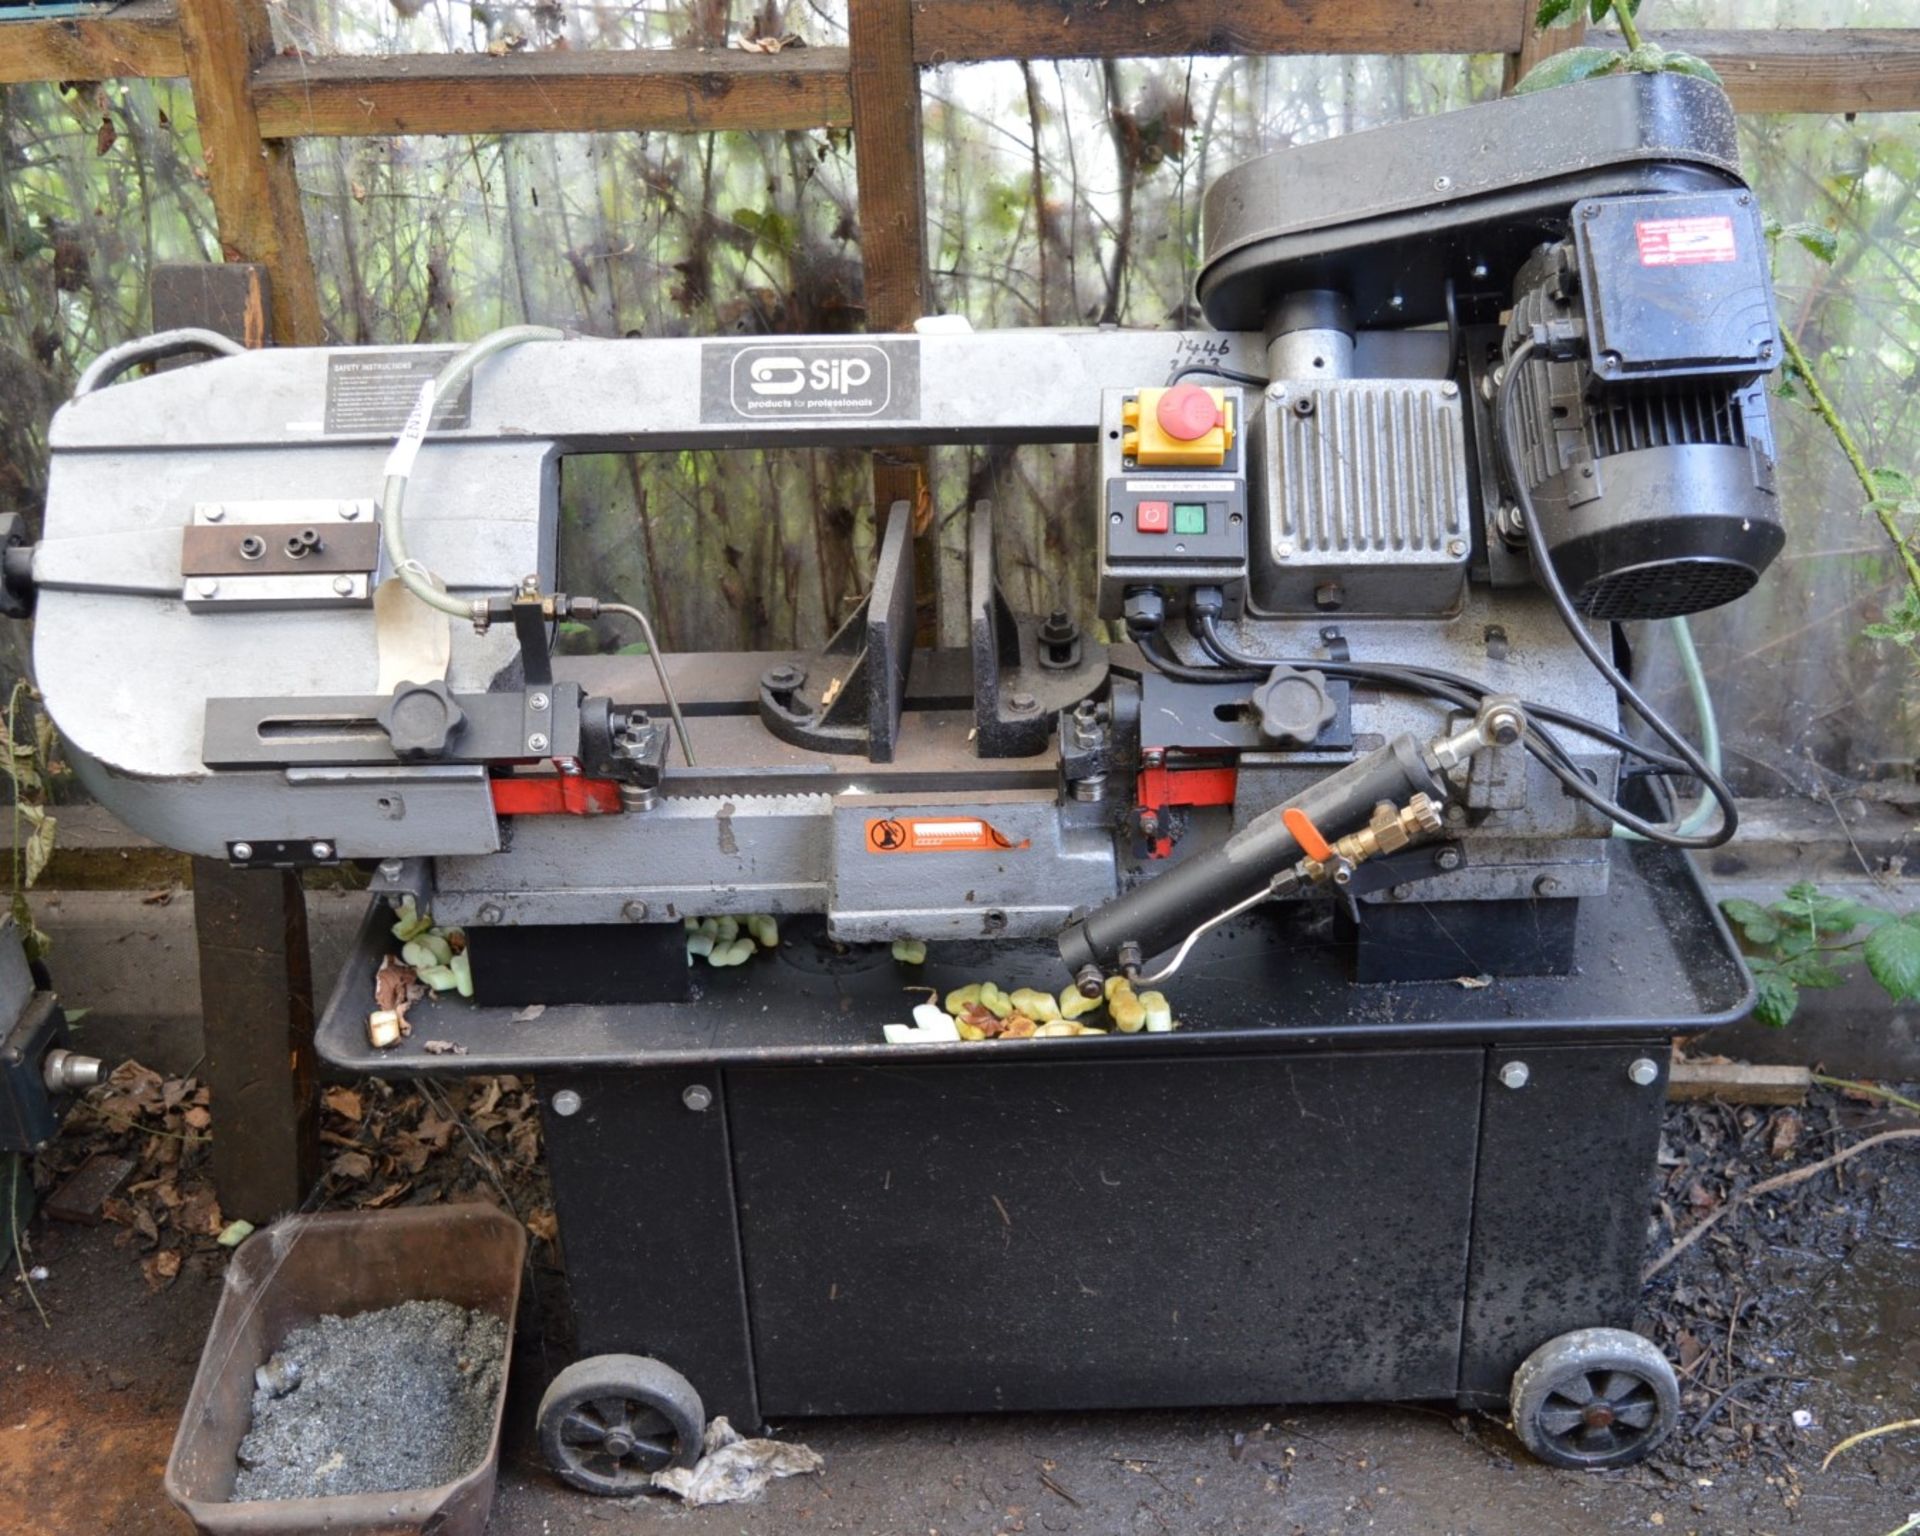 1 x Sip Trade Metal Cutting Band Saw - 12" X 7" - CL202 - Ref EN168 - Location: Worcester WR14 - Image 2 of 4